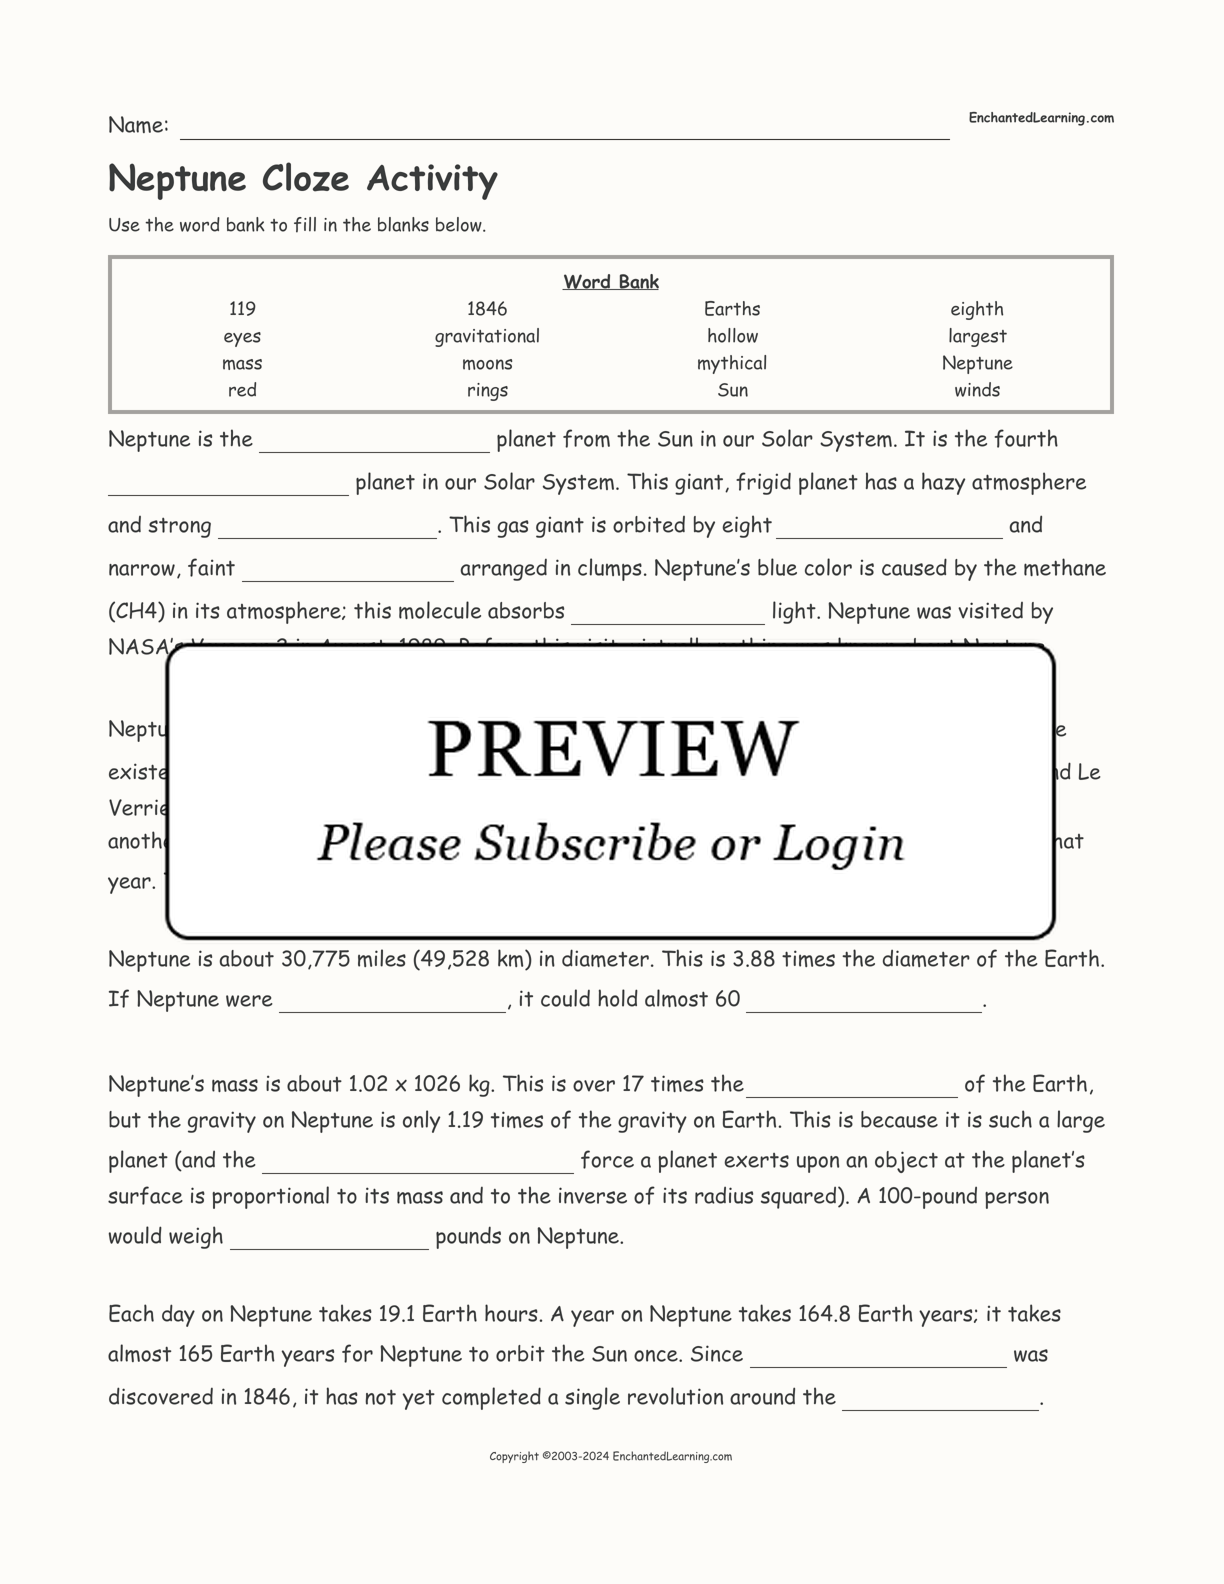 Neptune Cloze Activity interactive worksheet page 1